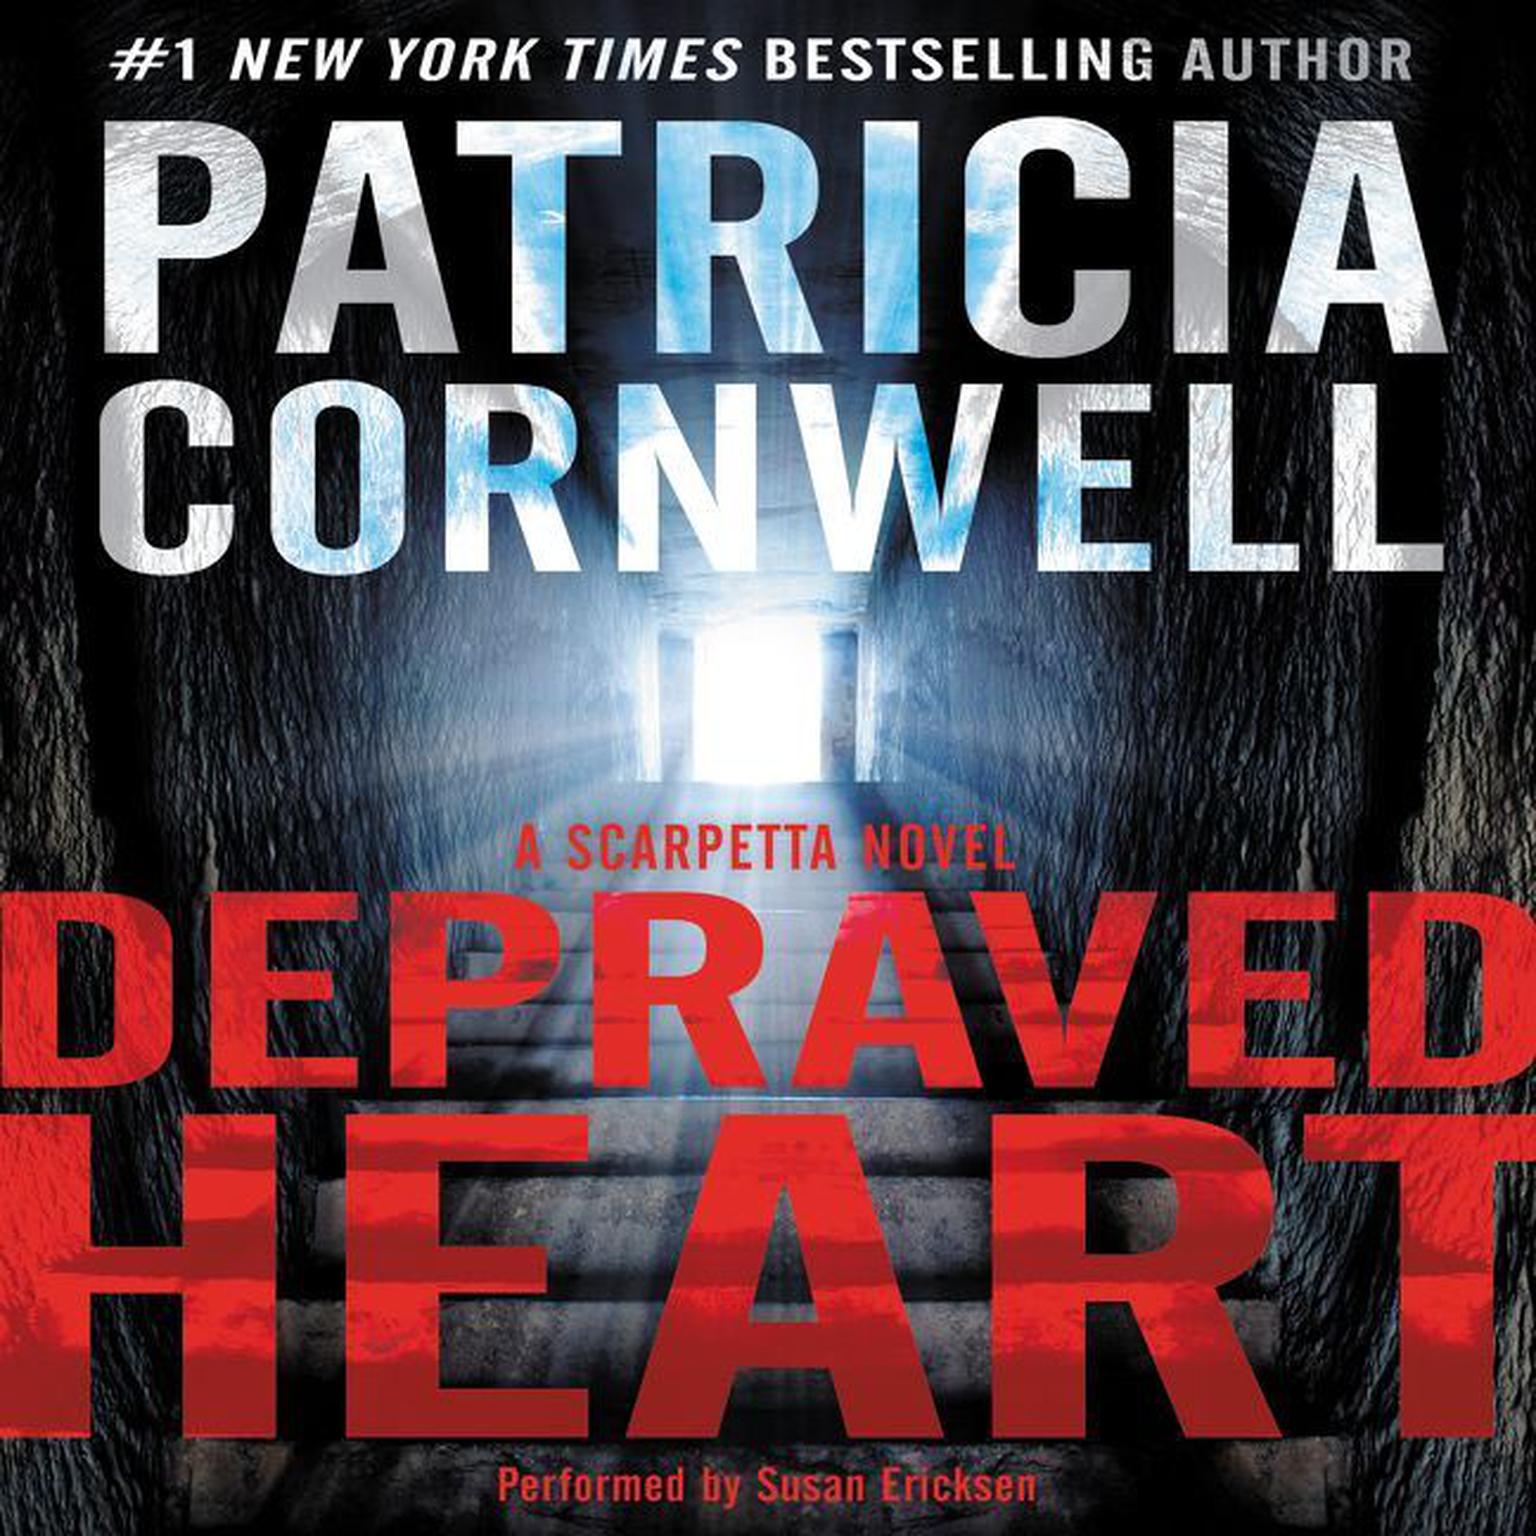 Depraved Heart Audiobook, by Patricia Cornwell